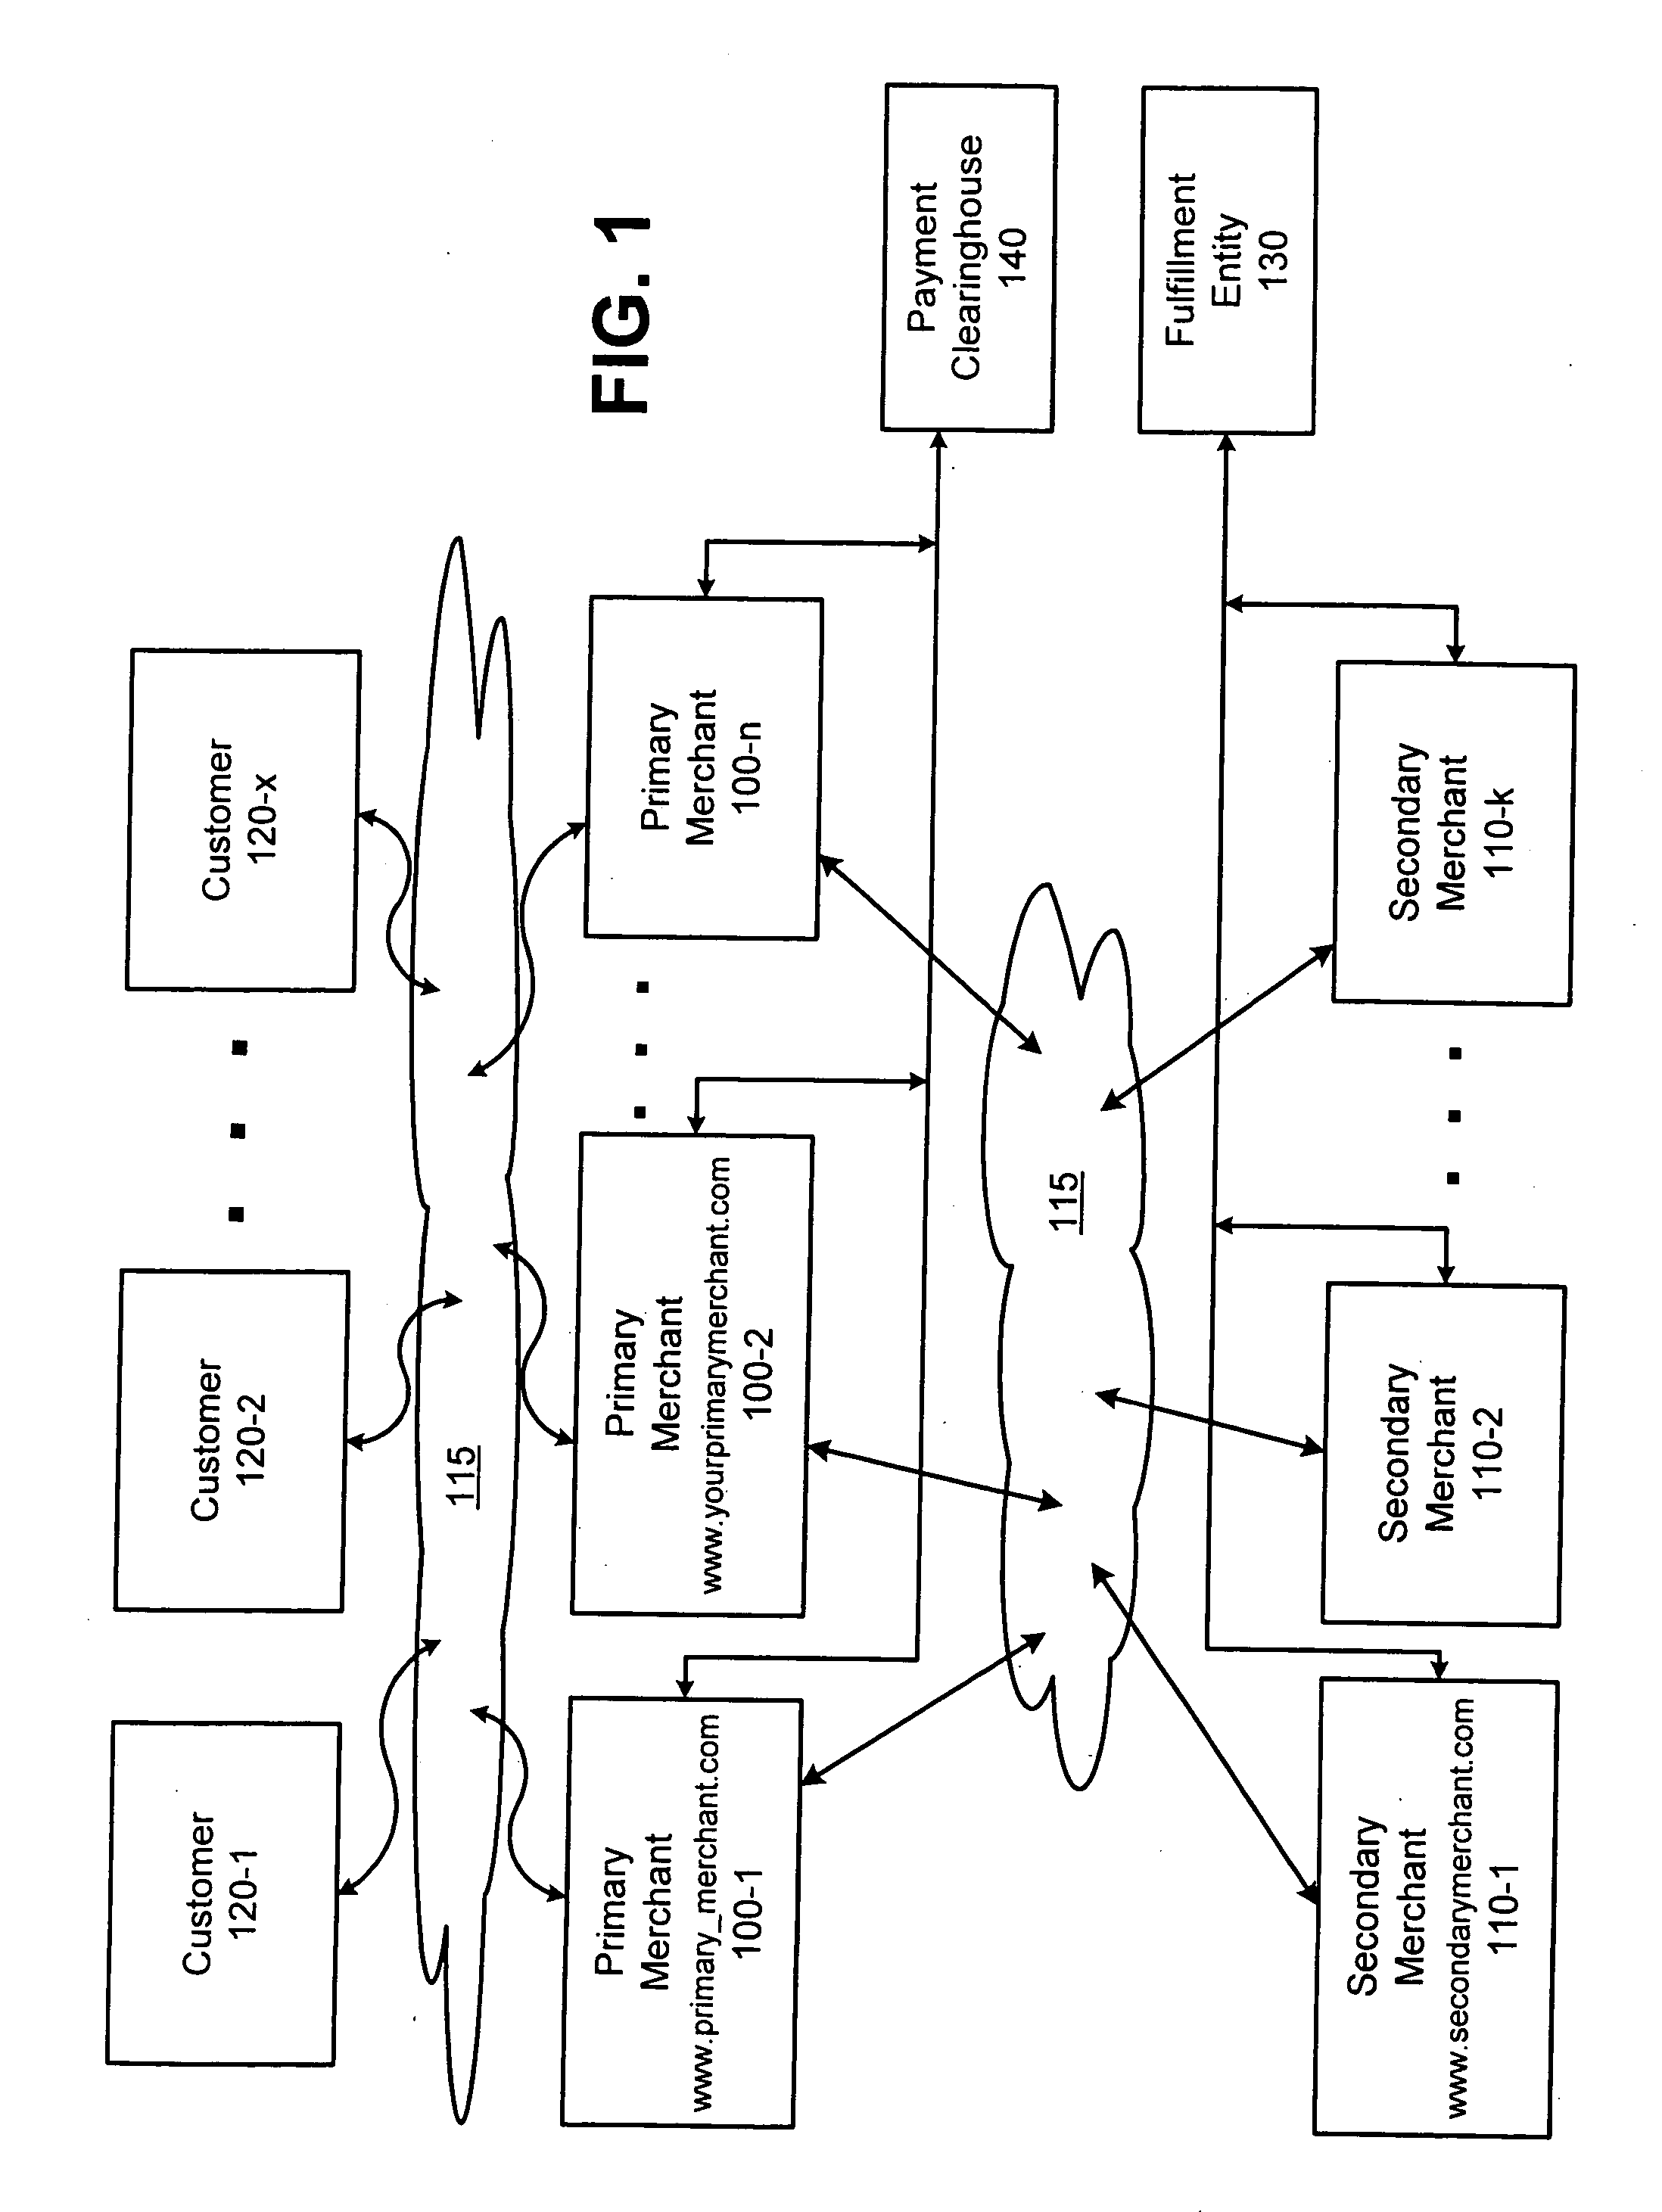 Method and apparatus for relational linking based upon customer activities